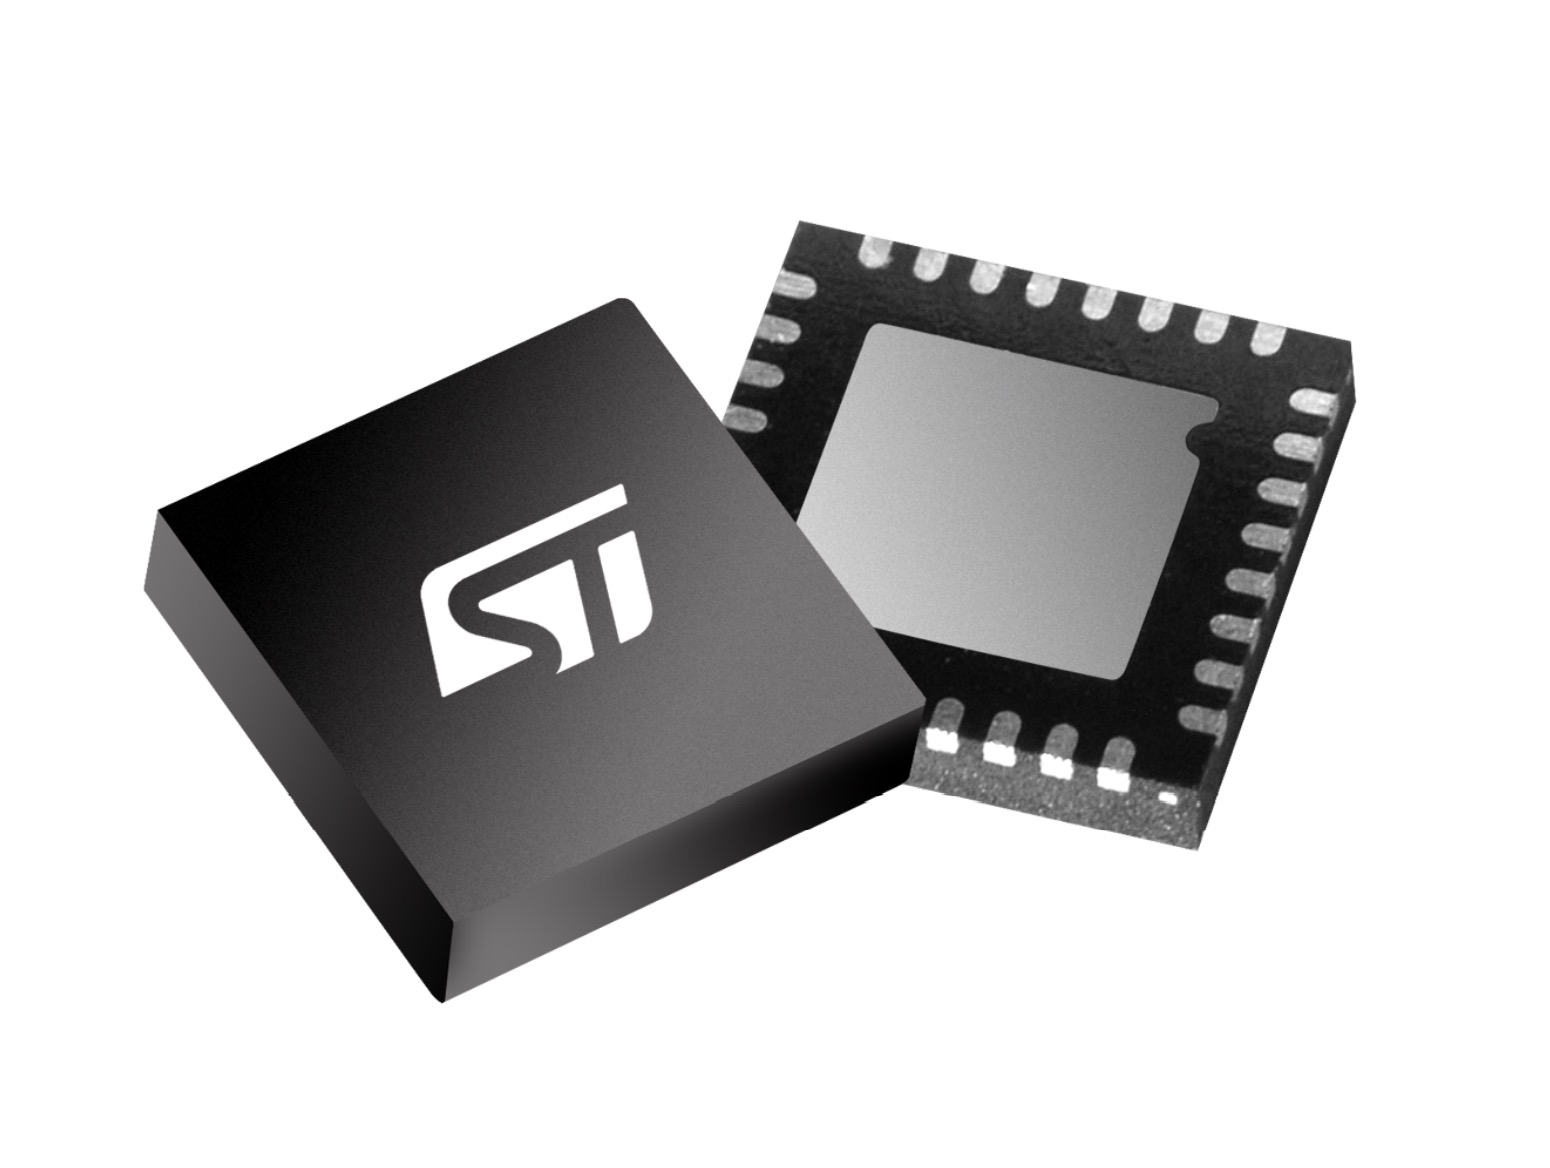 SPSB081 Automotive Power Management IC with LIN and CAN-FD